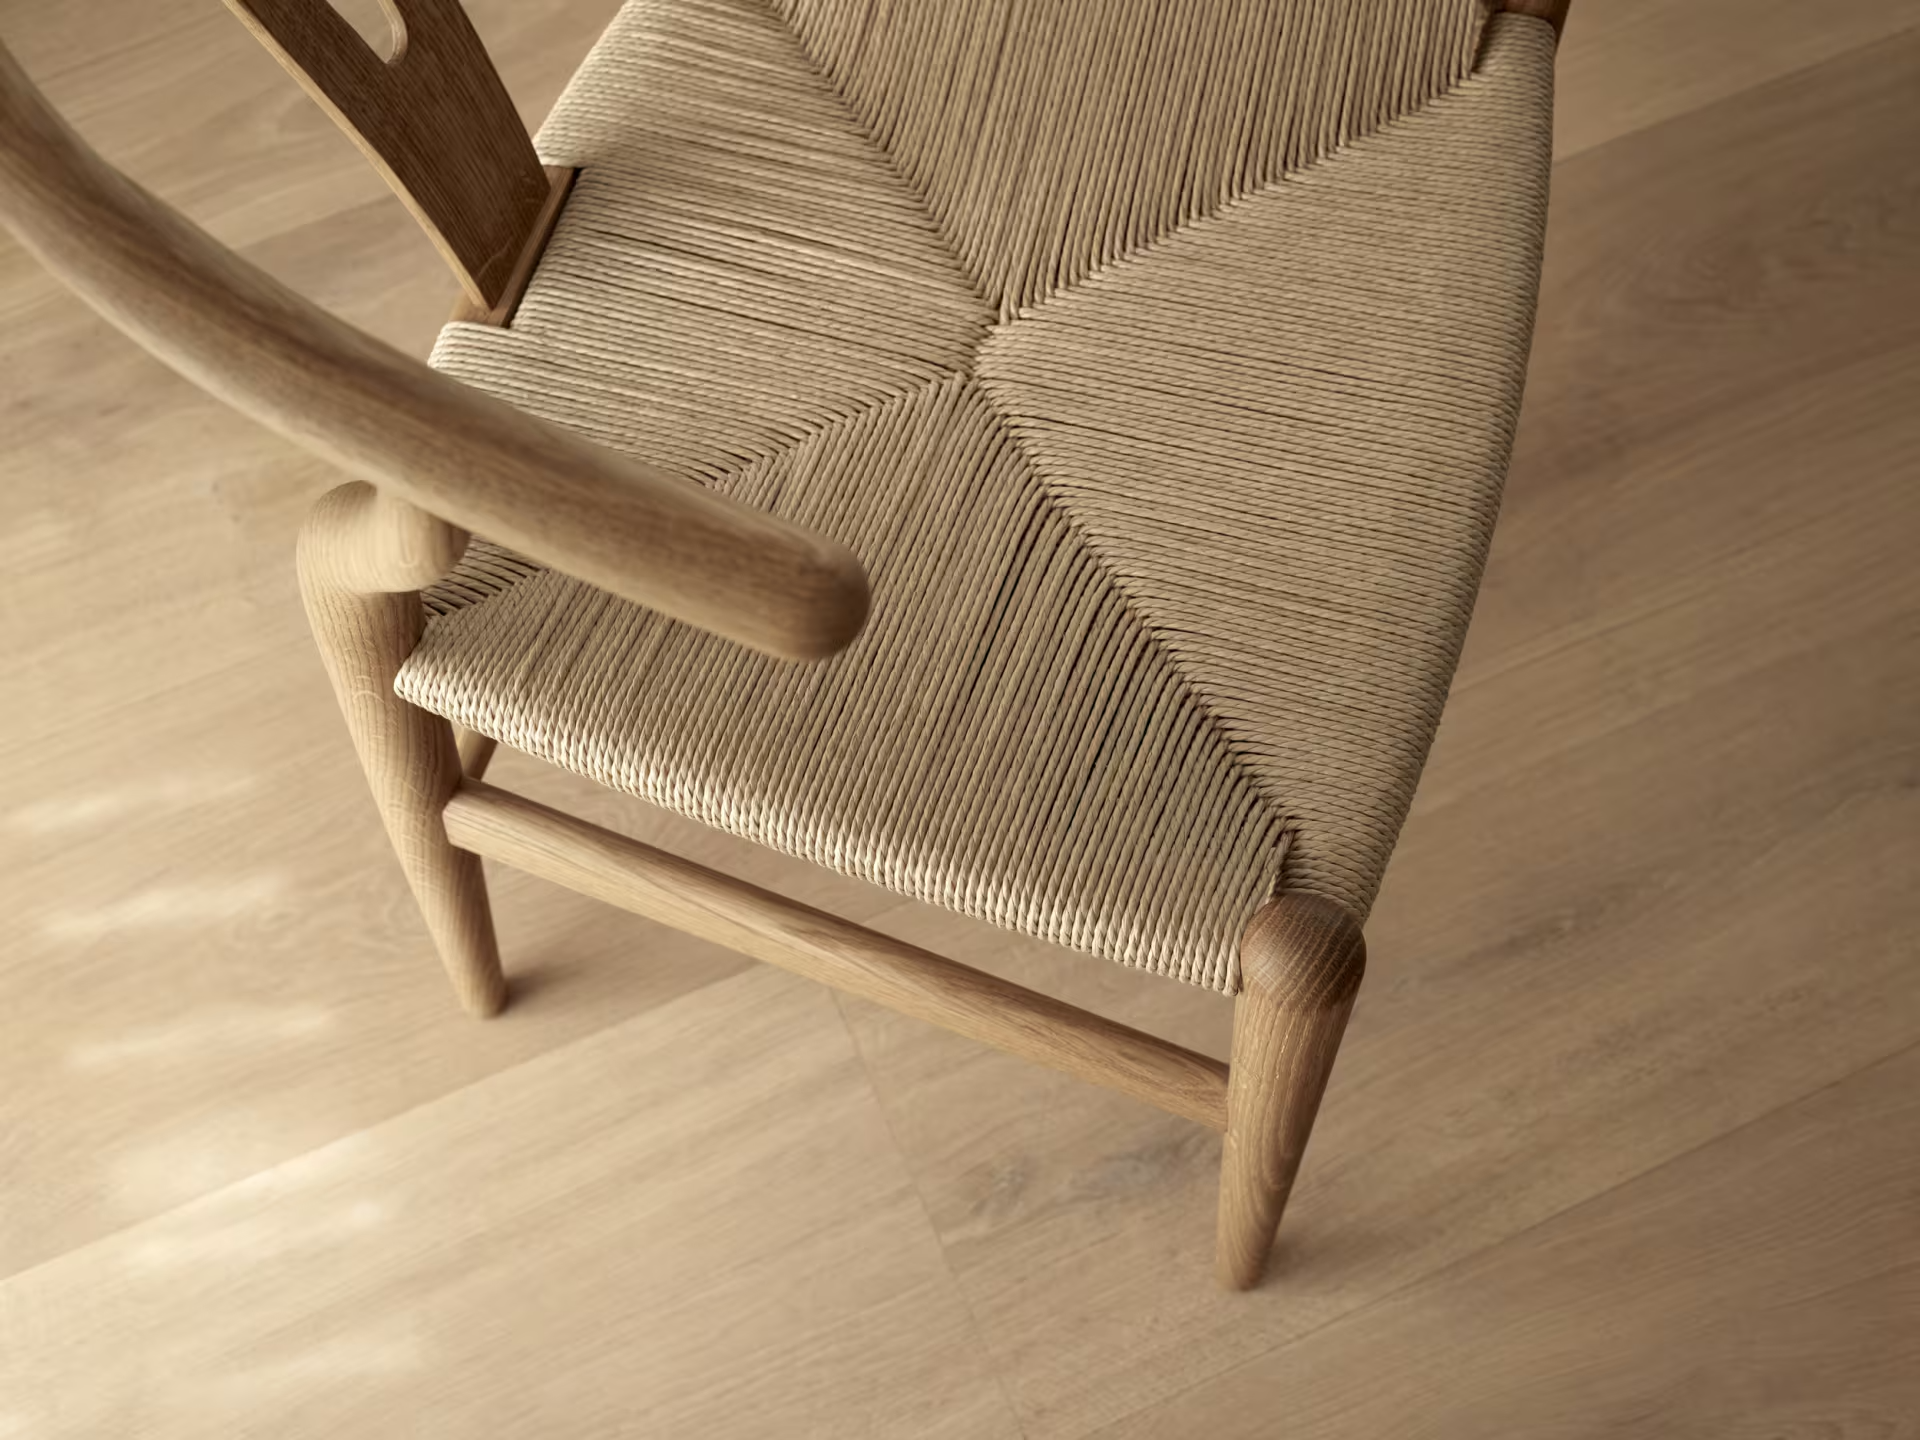 https---admincms.carlhansen.com-globalassets-products-chairs-ch24-oak-ch24_oak_oil_papercord_natural_detail.png